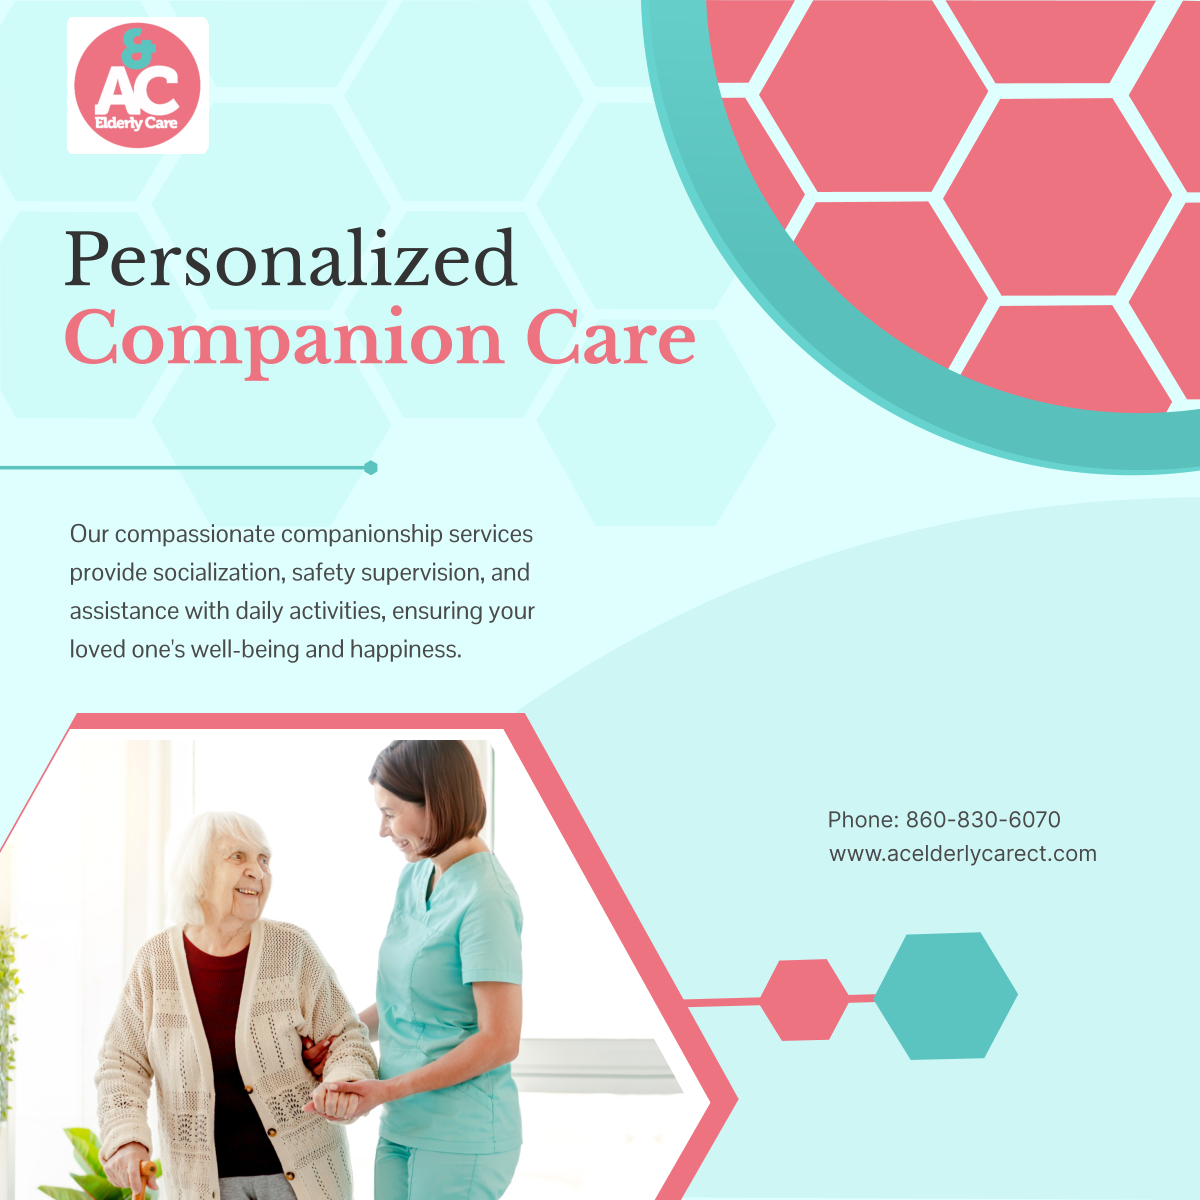 Give your loved one the gift of companionship and support. Learn more about our personalized companion care services today! 

#EastHartfordCT #HomeCare #CompanionCare